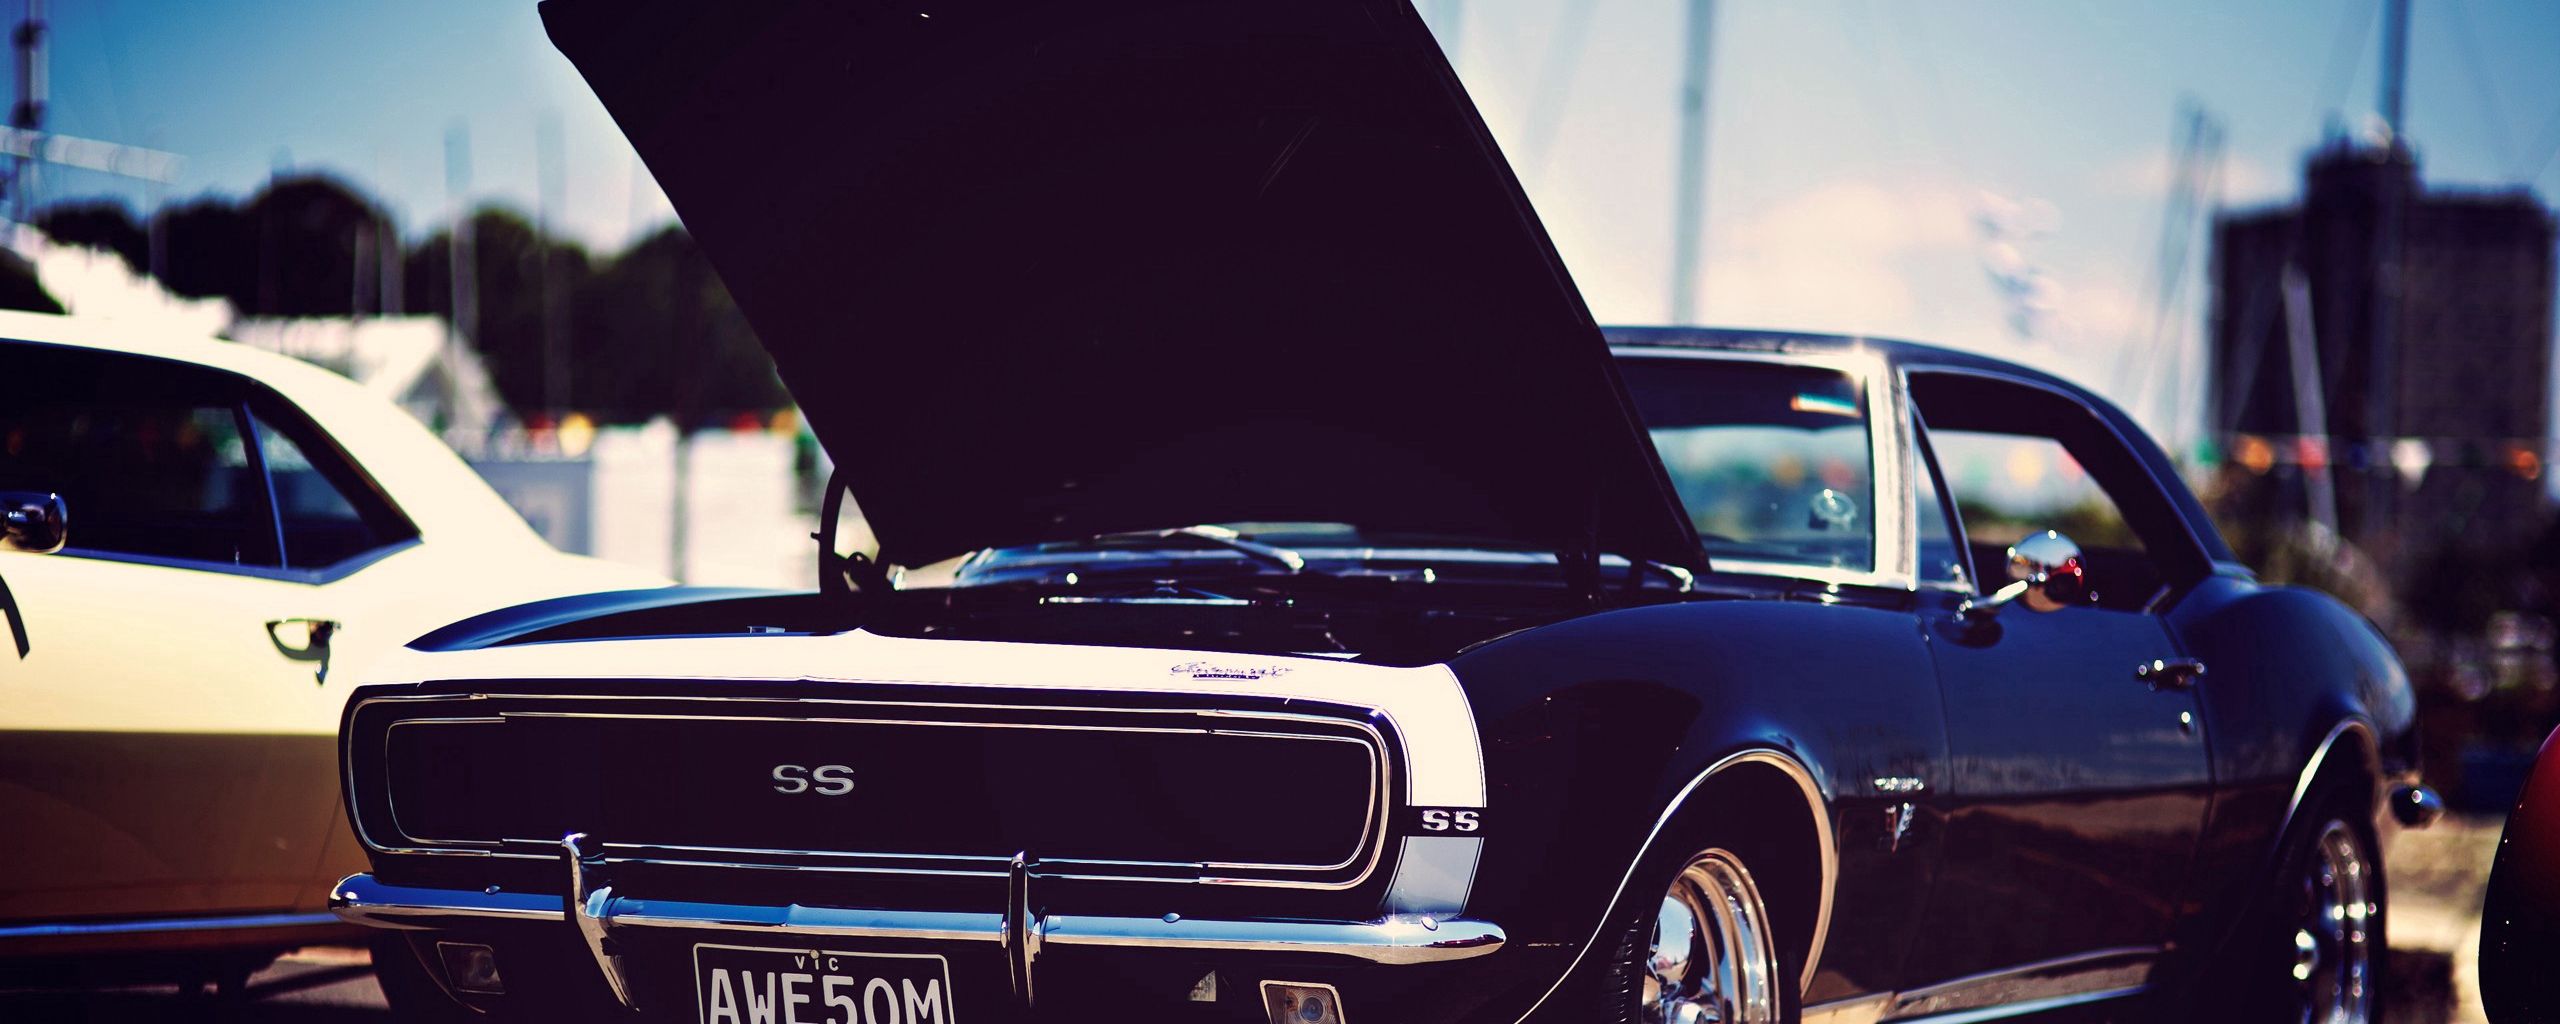 Download wallpaper 2560x1024 american cars, muscle, stylish, car